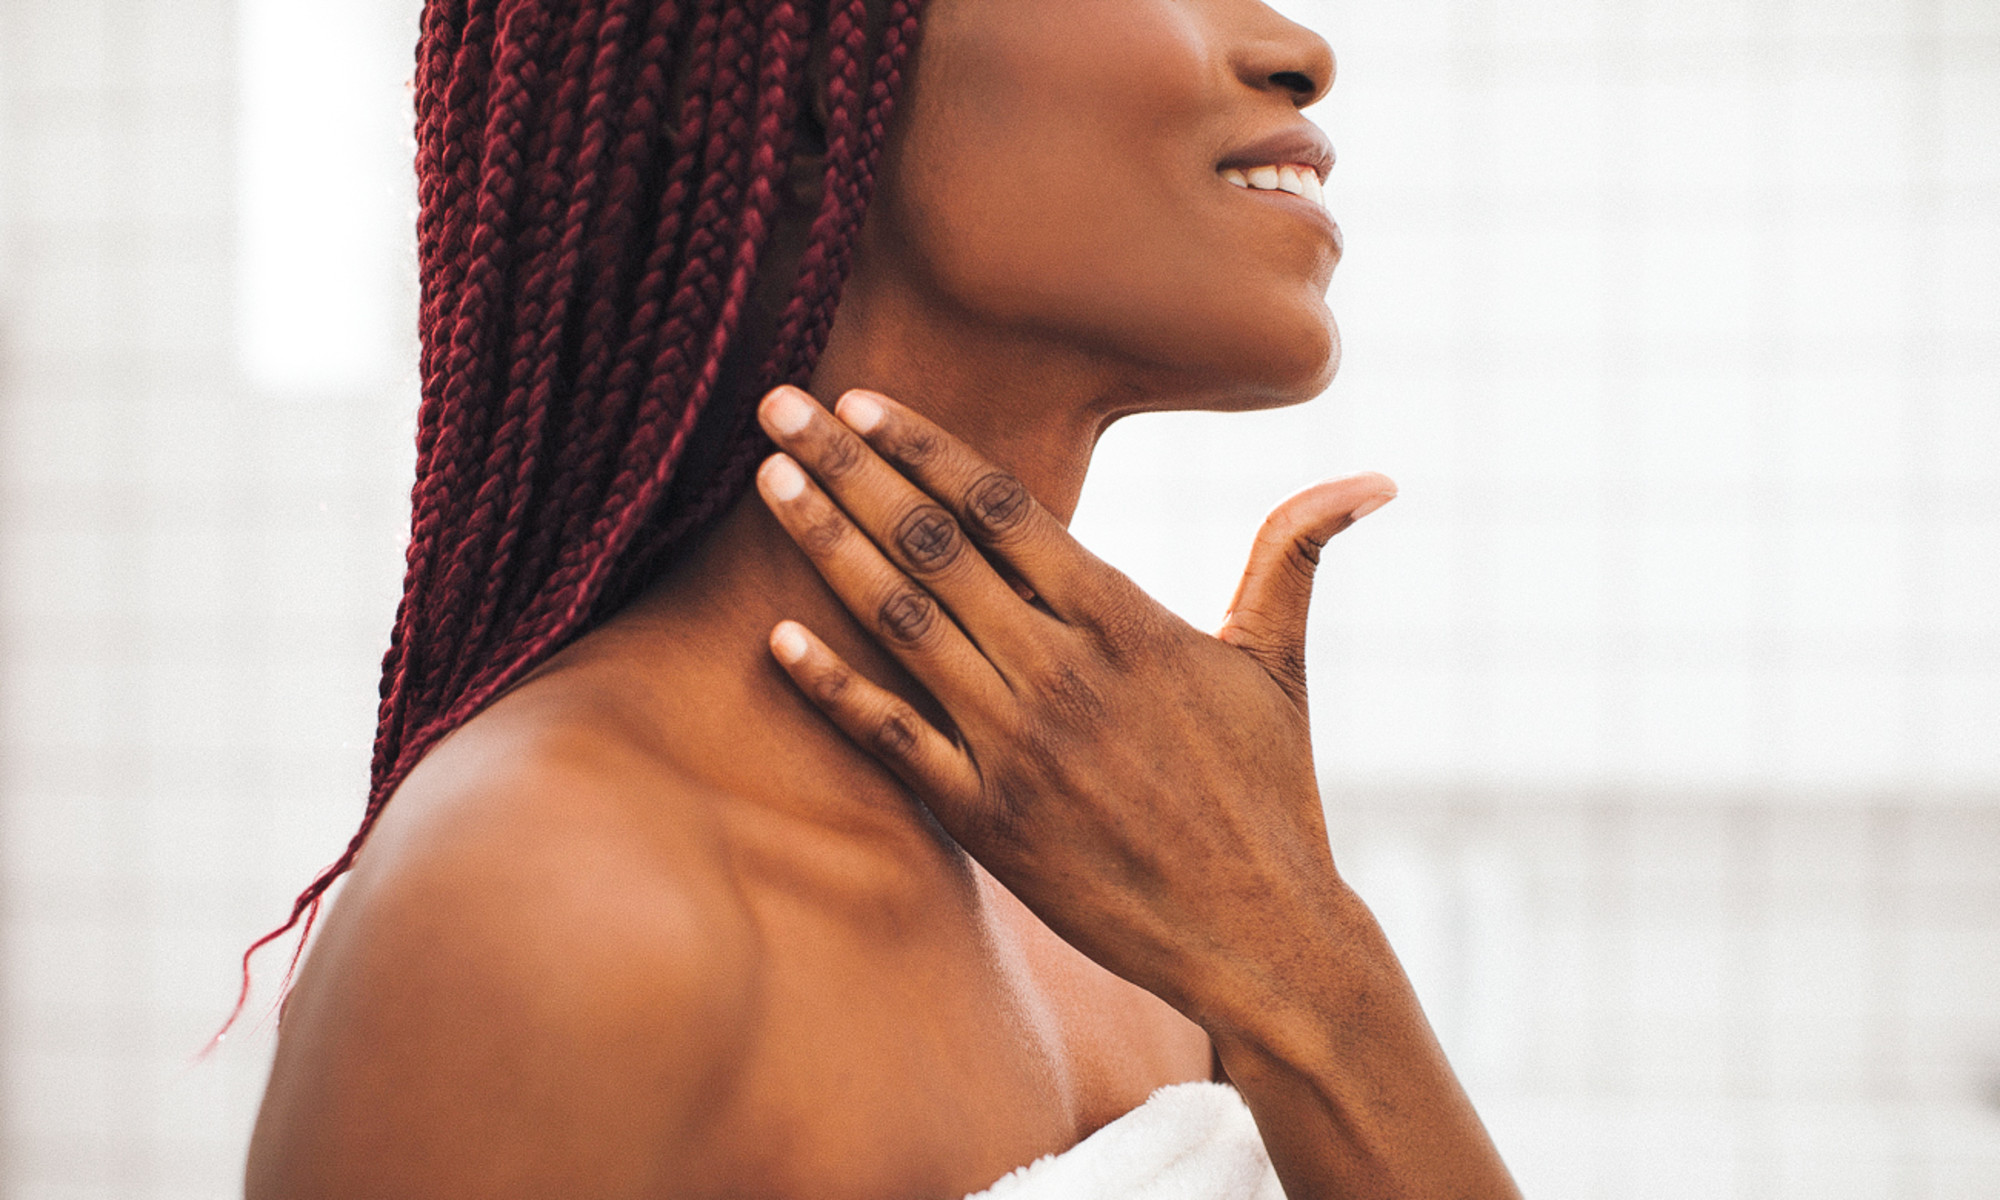 A Complete Guide To Neck Acne: Causes & Remedies